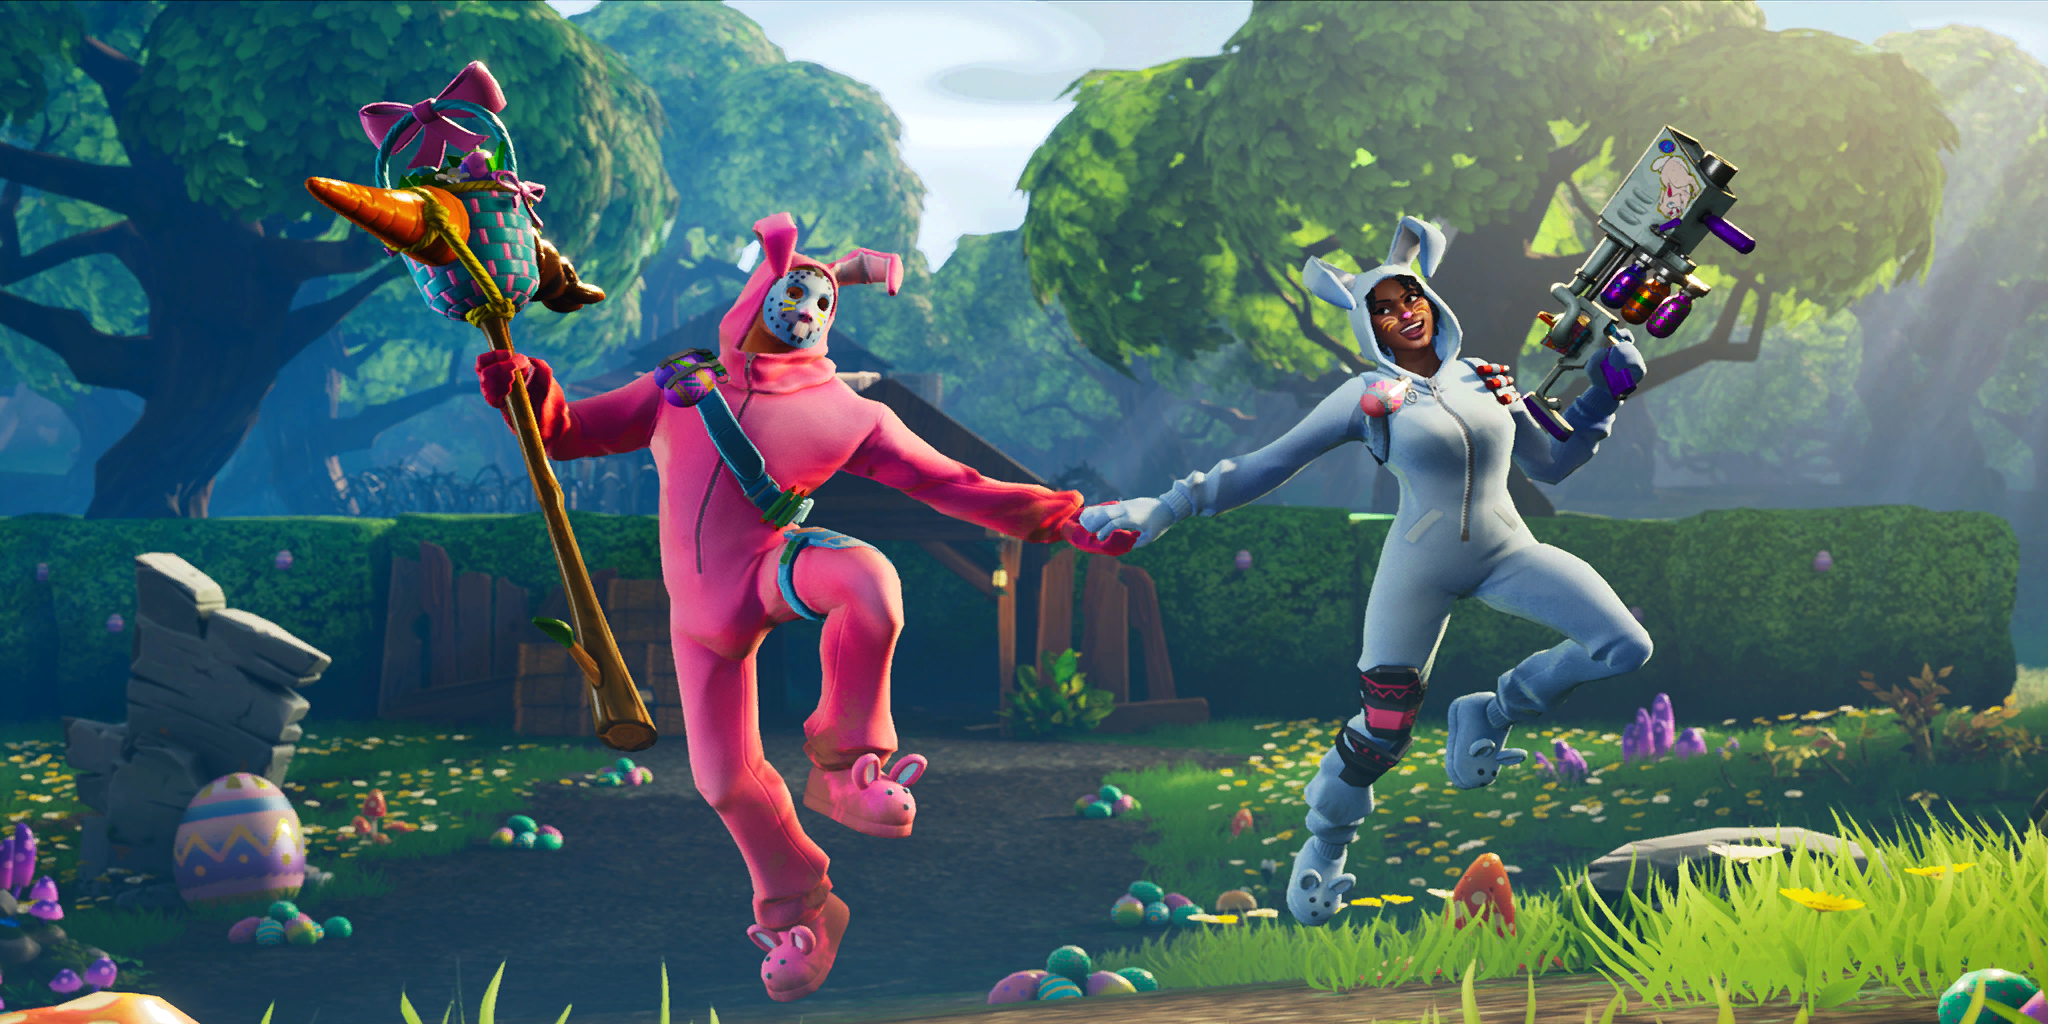 fortnite season 8 events st patrick s day easter and maybe thanos inverse - avengers endgame fortnite gamemode